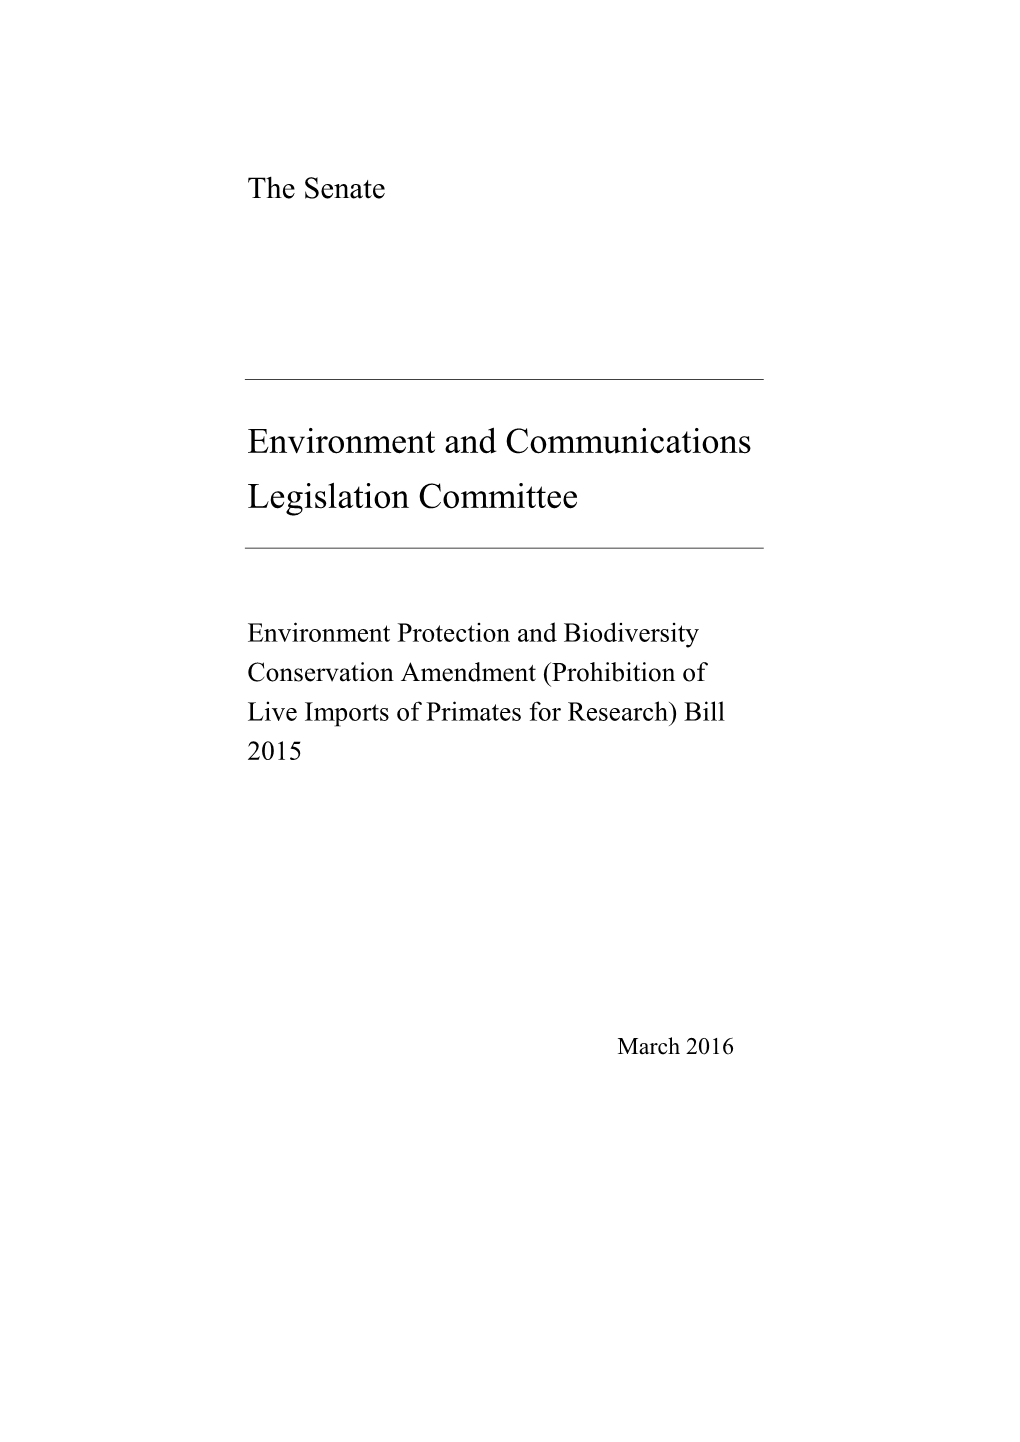 Environment and Communications Legislation Committee